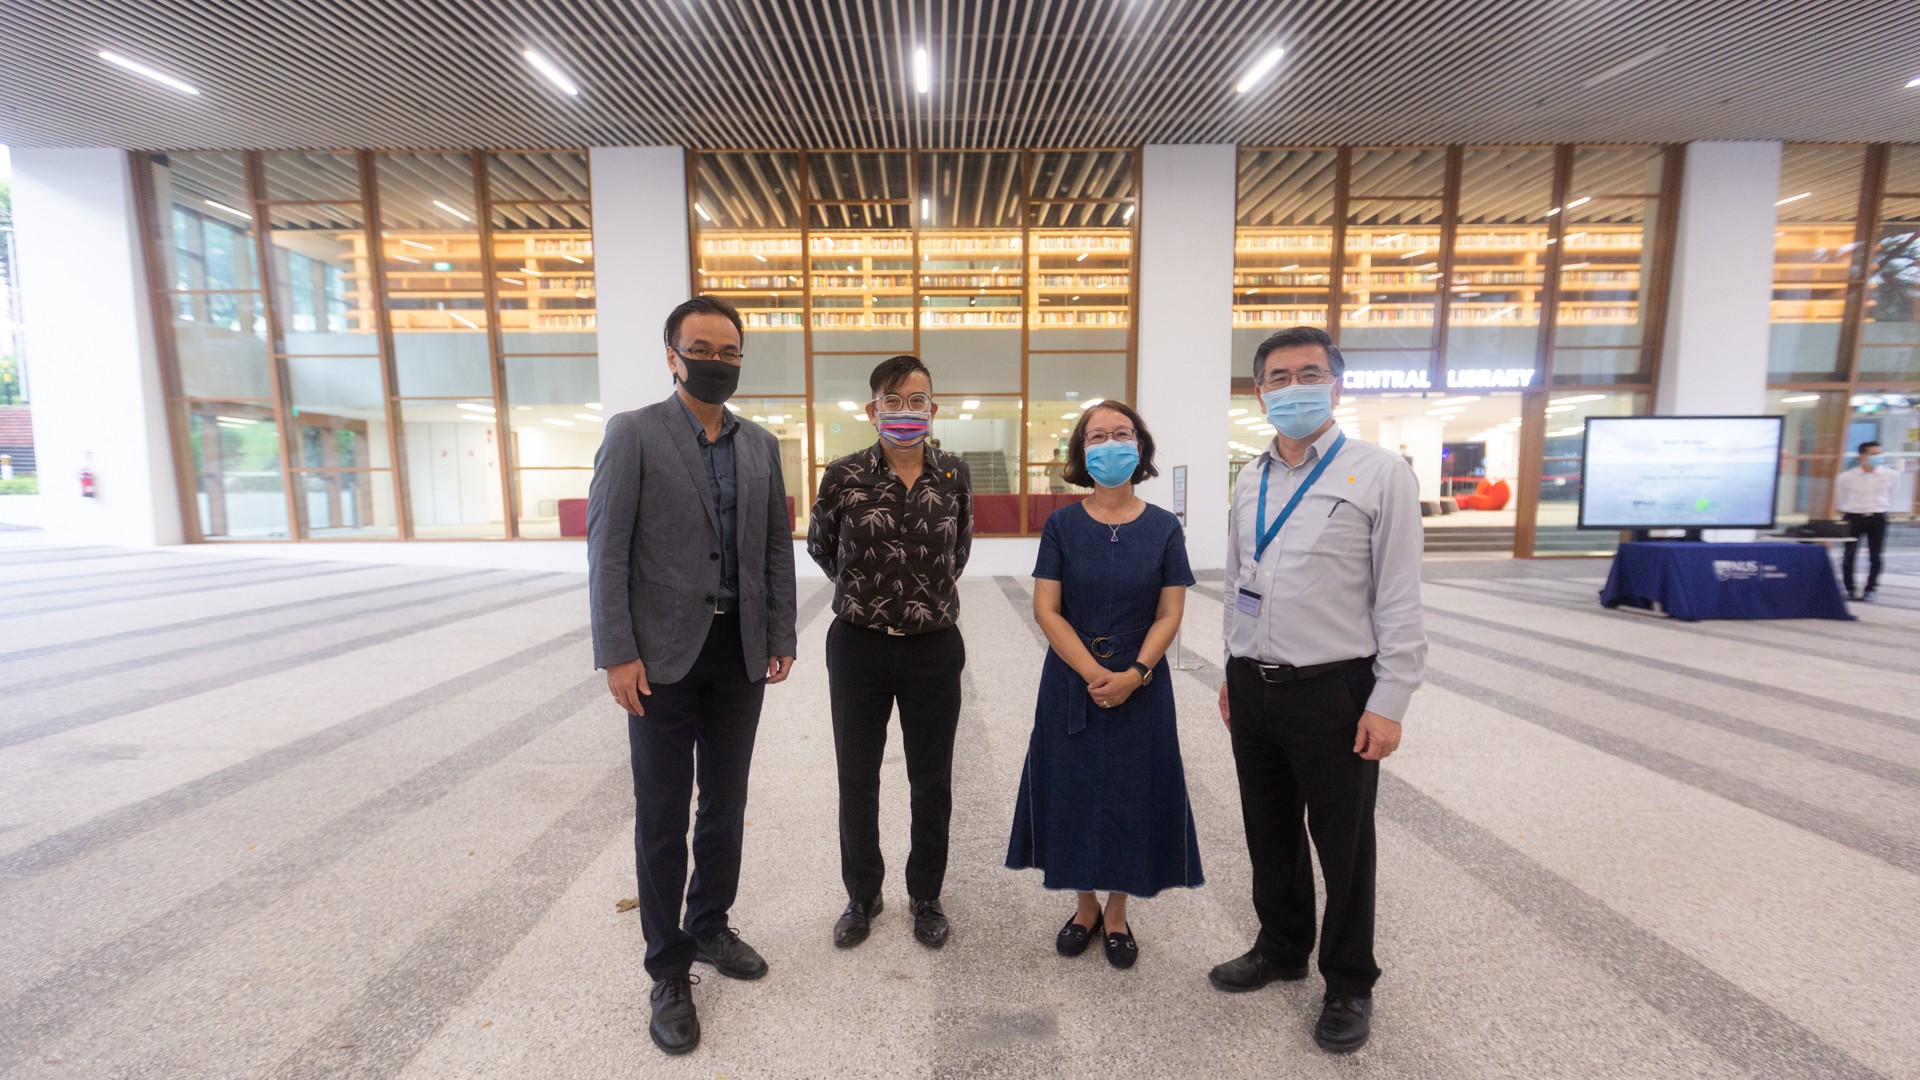 Present at the launch of BookBridge yesterday were (from left): Assoc Prof Okuda; Head of SDE's Department of Architecture Prof Ho Puay Peng; Mrs Lee and Prof Lam.